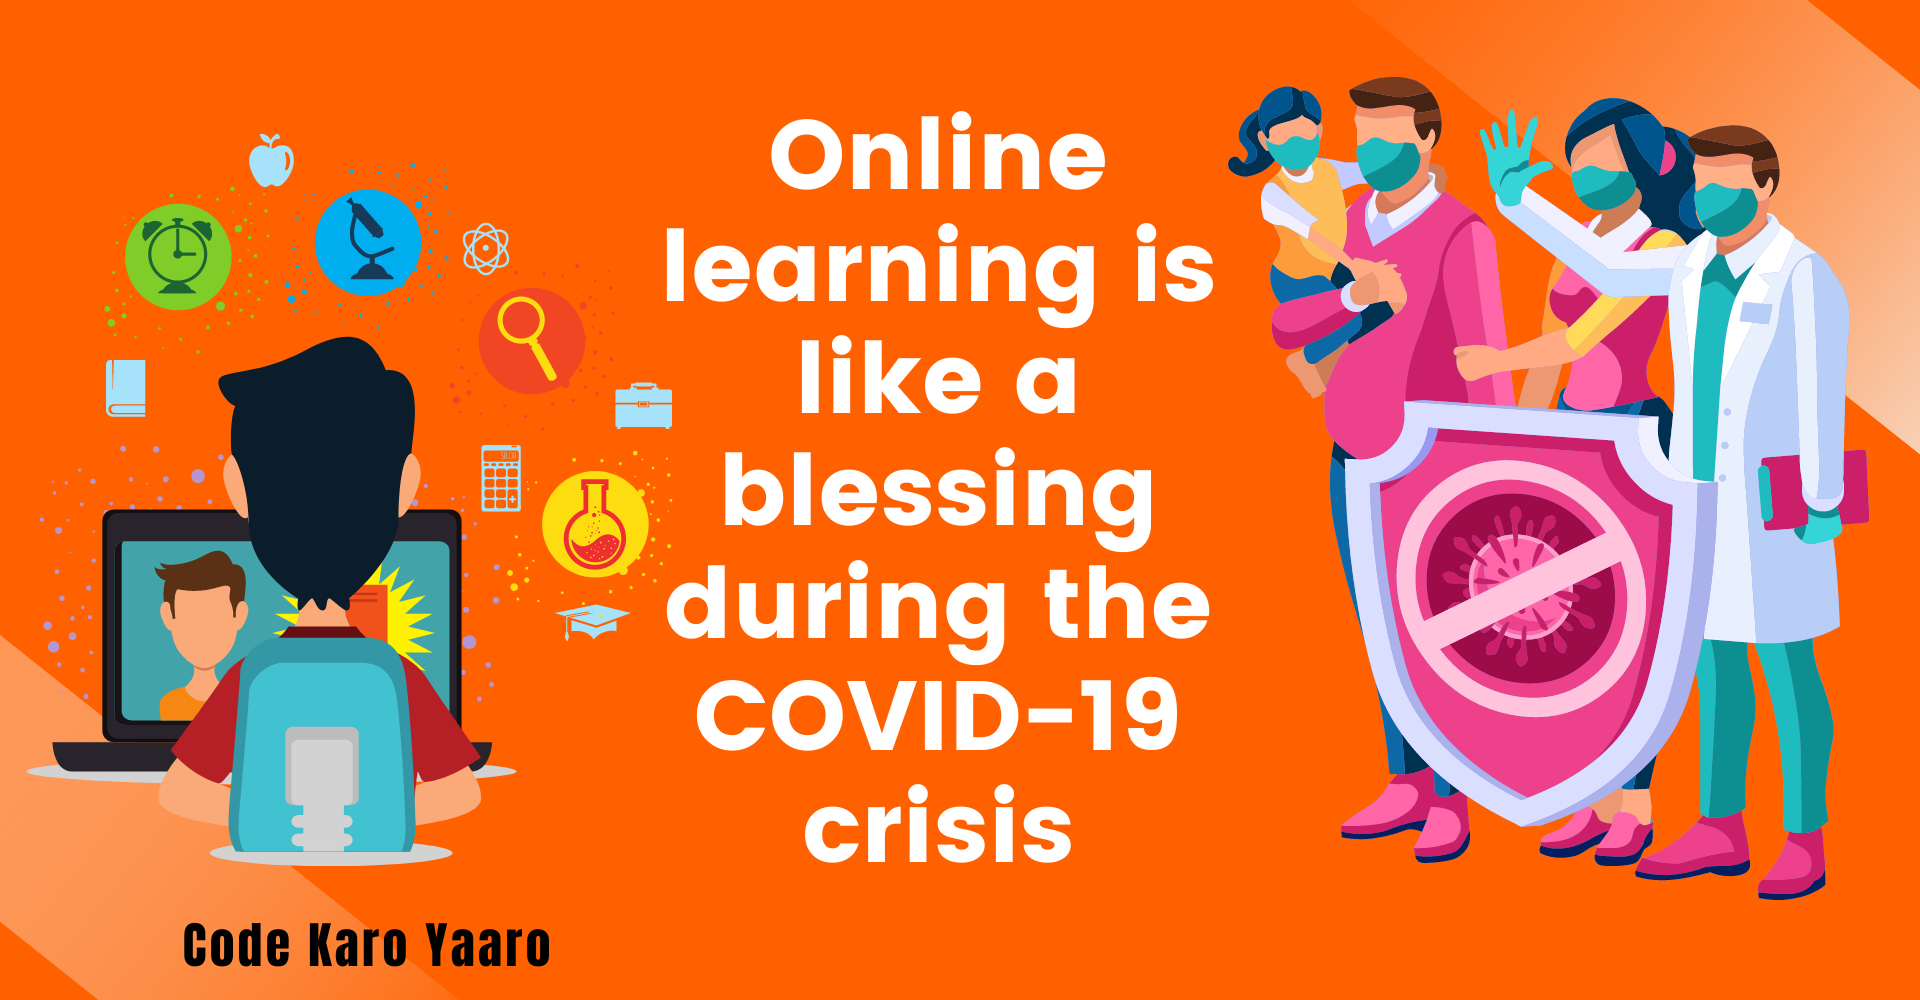 online-learning-is-like-a-blessing-during-the-COVID-19-crisis.